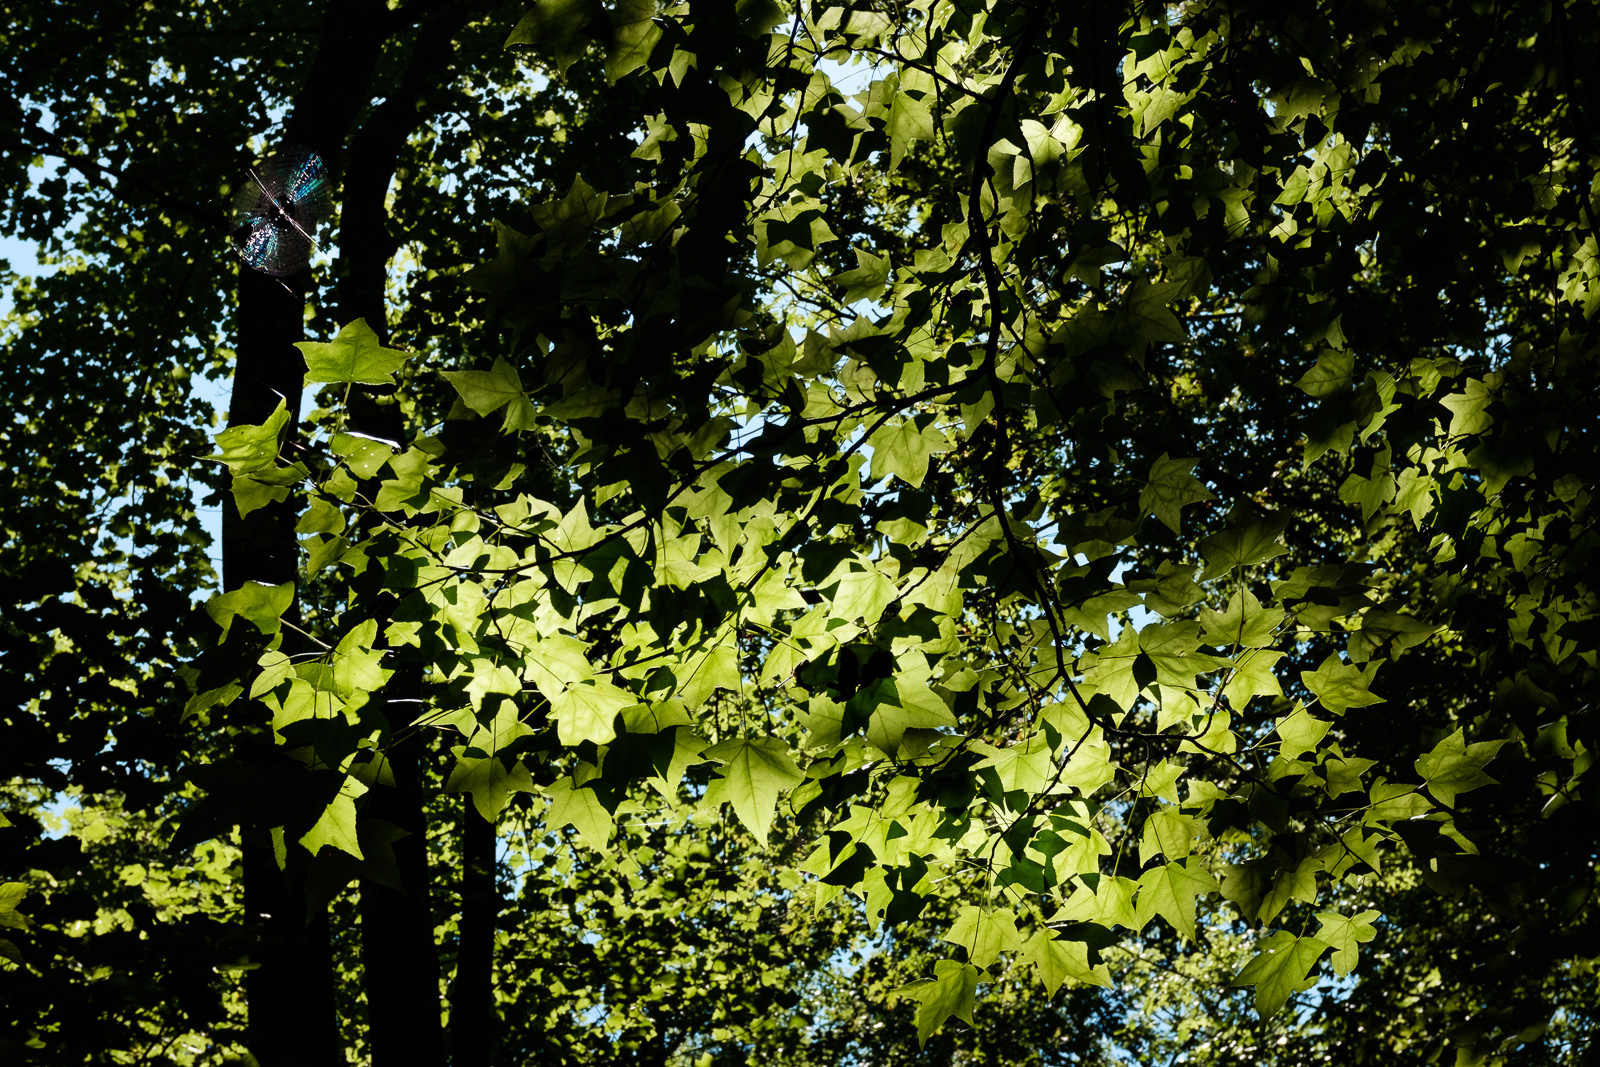 I was interested in the light that came through the leaves. I didn't even see an interesting detail til I opened this up on my computer at home